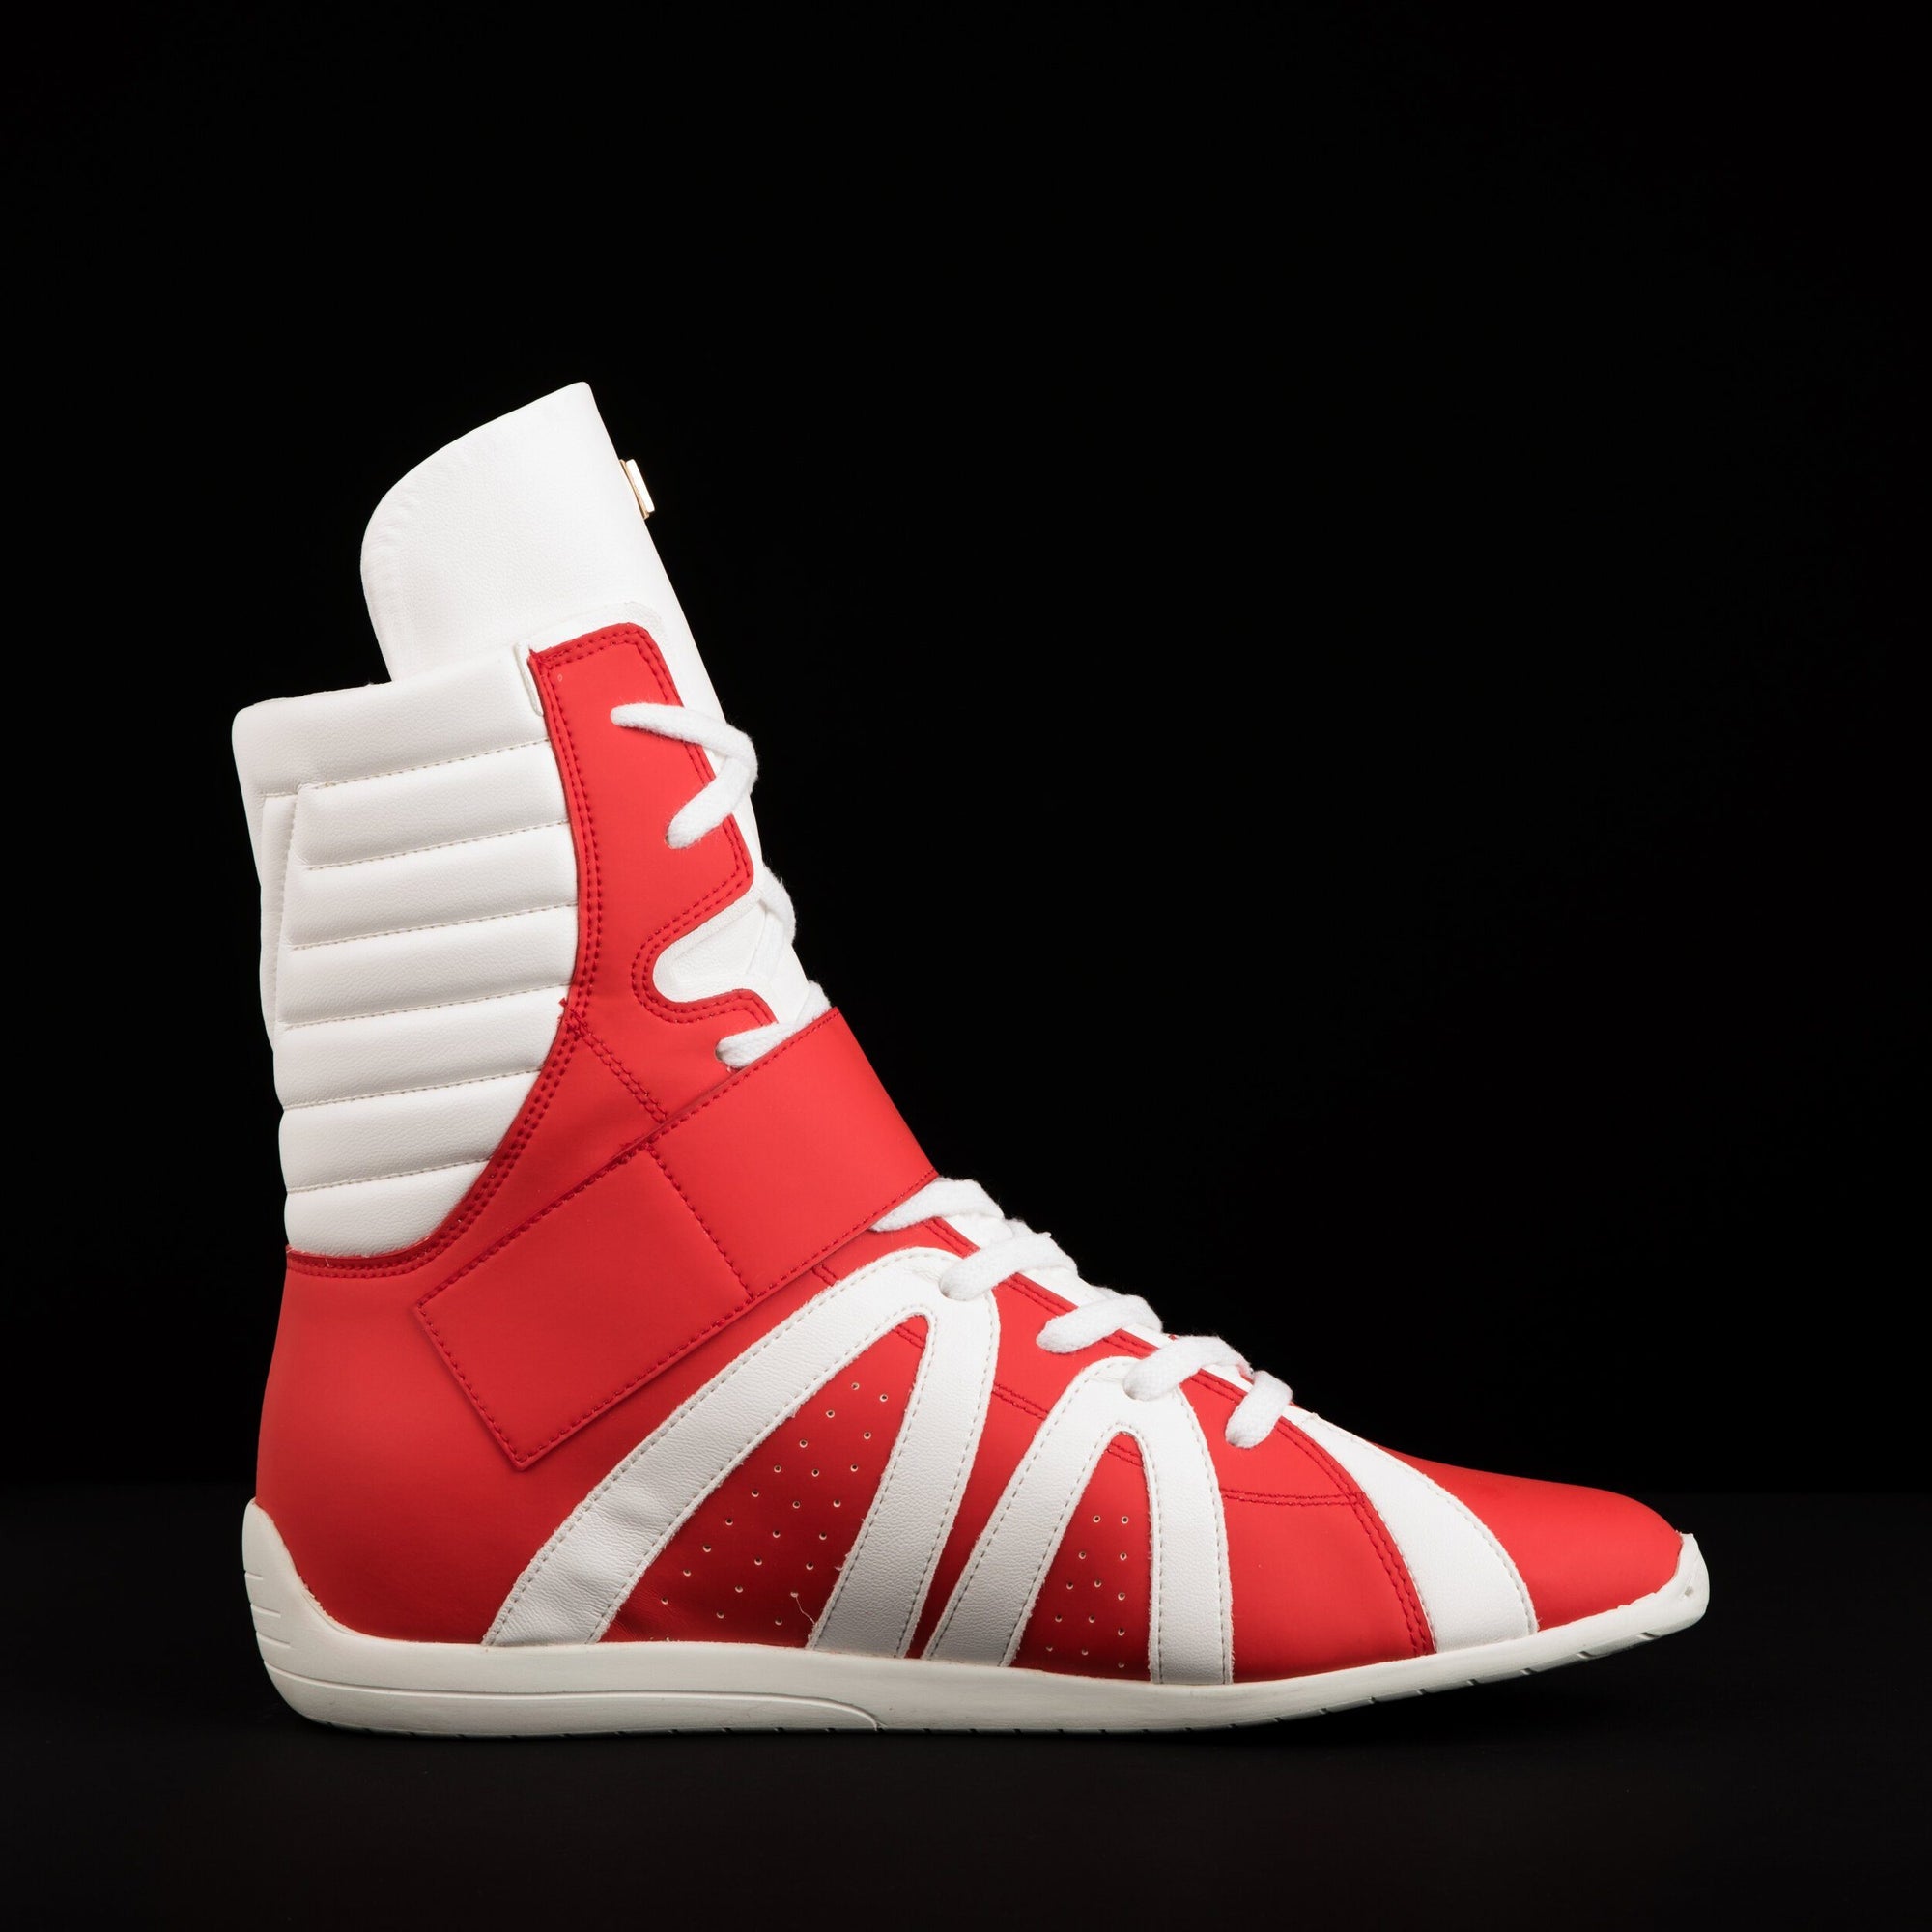 unisex red white high top boxing shoes freee shipping